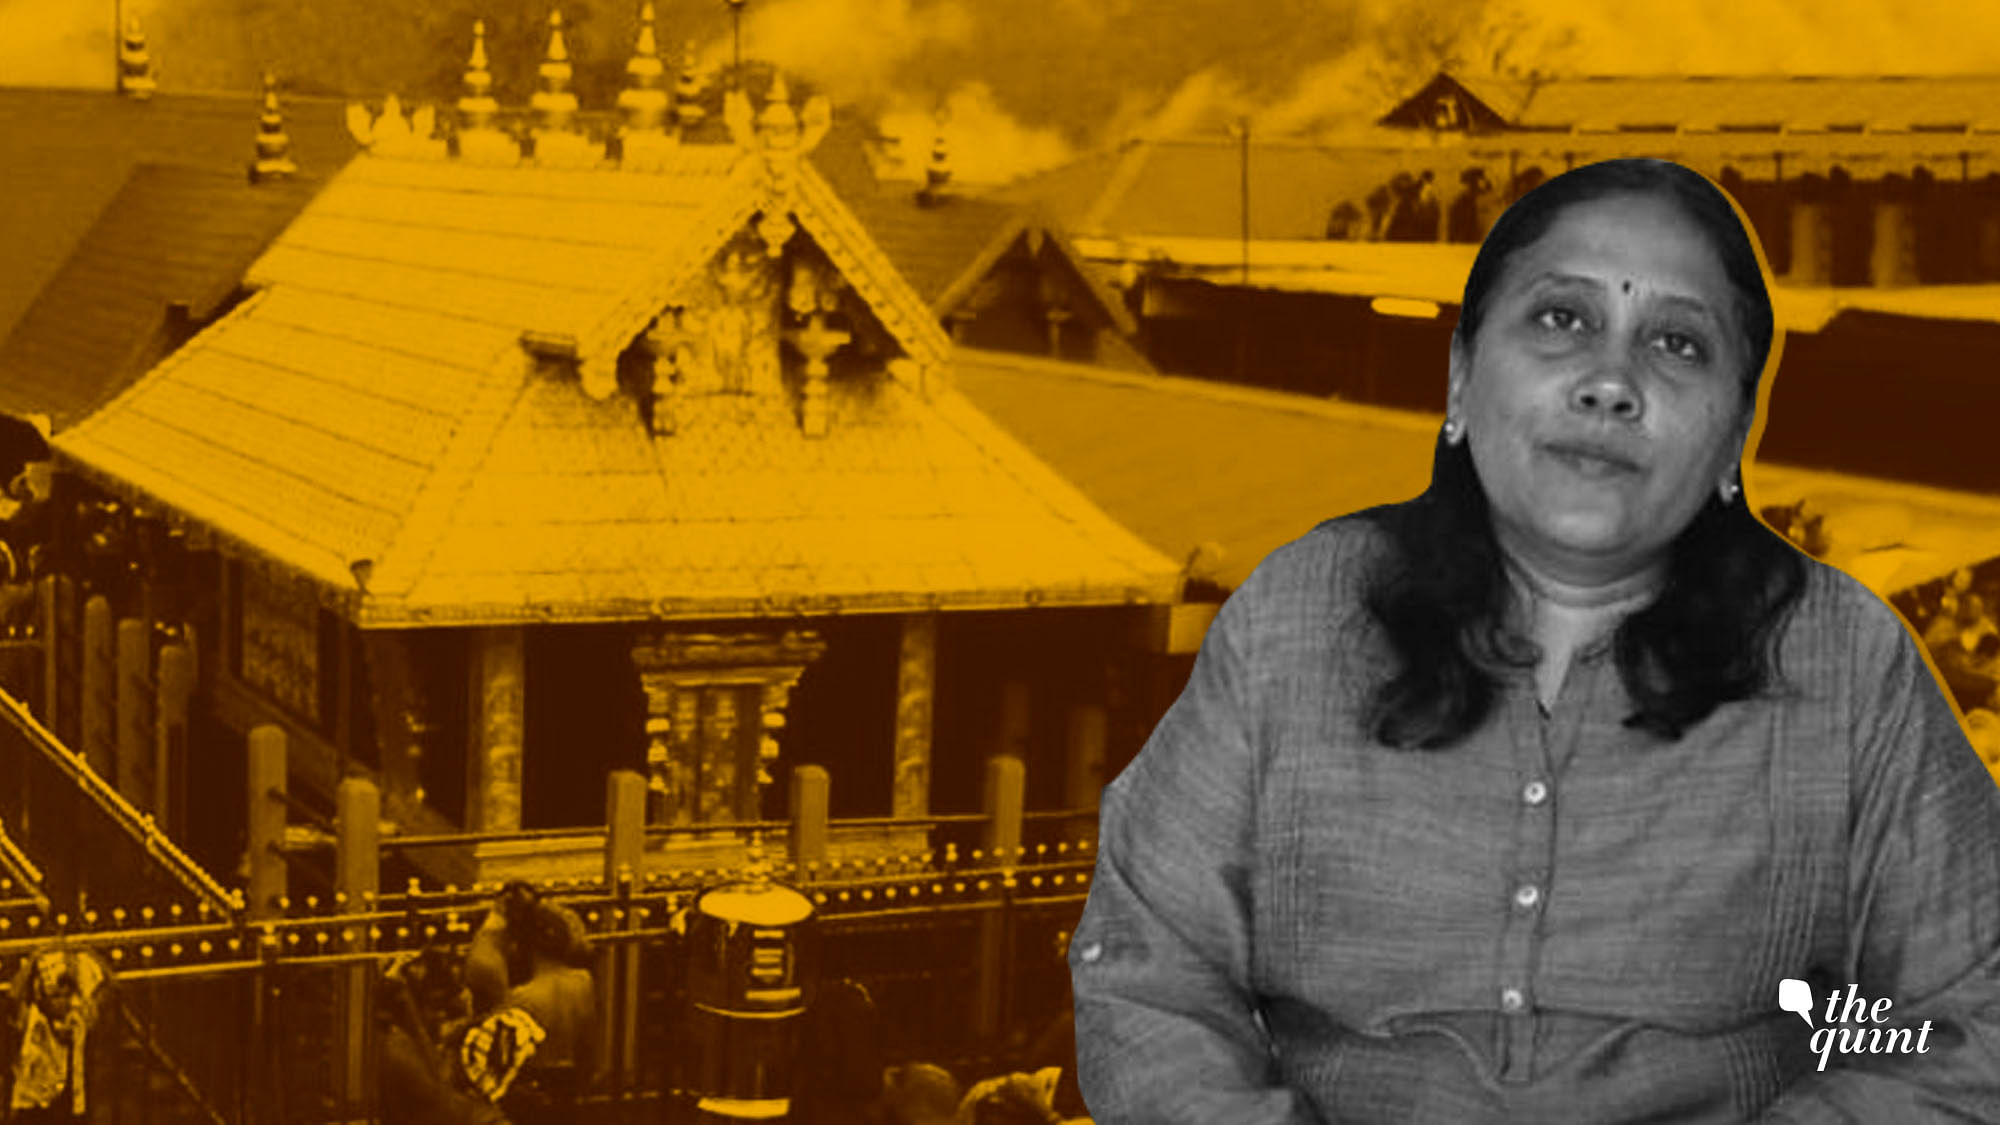 In an interview to The Quint, ‘Manithi’ Selvi reveals what happened when her group tried to enter the Sabarimala.